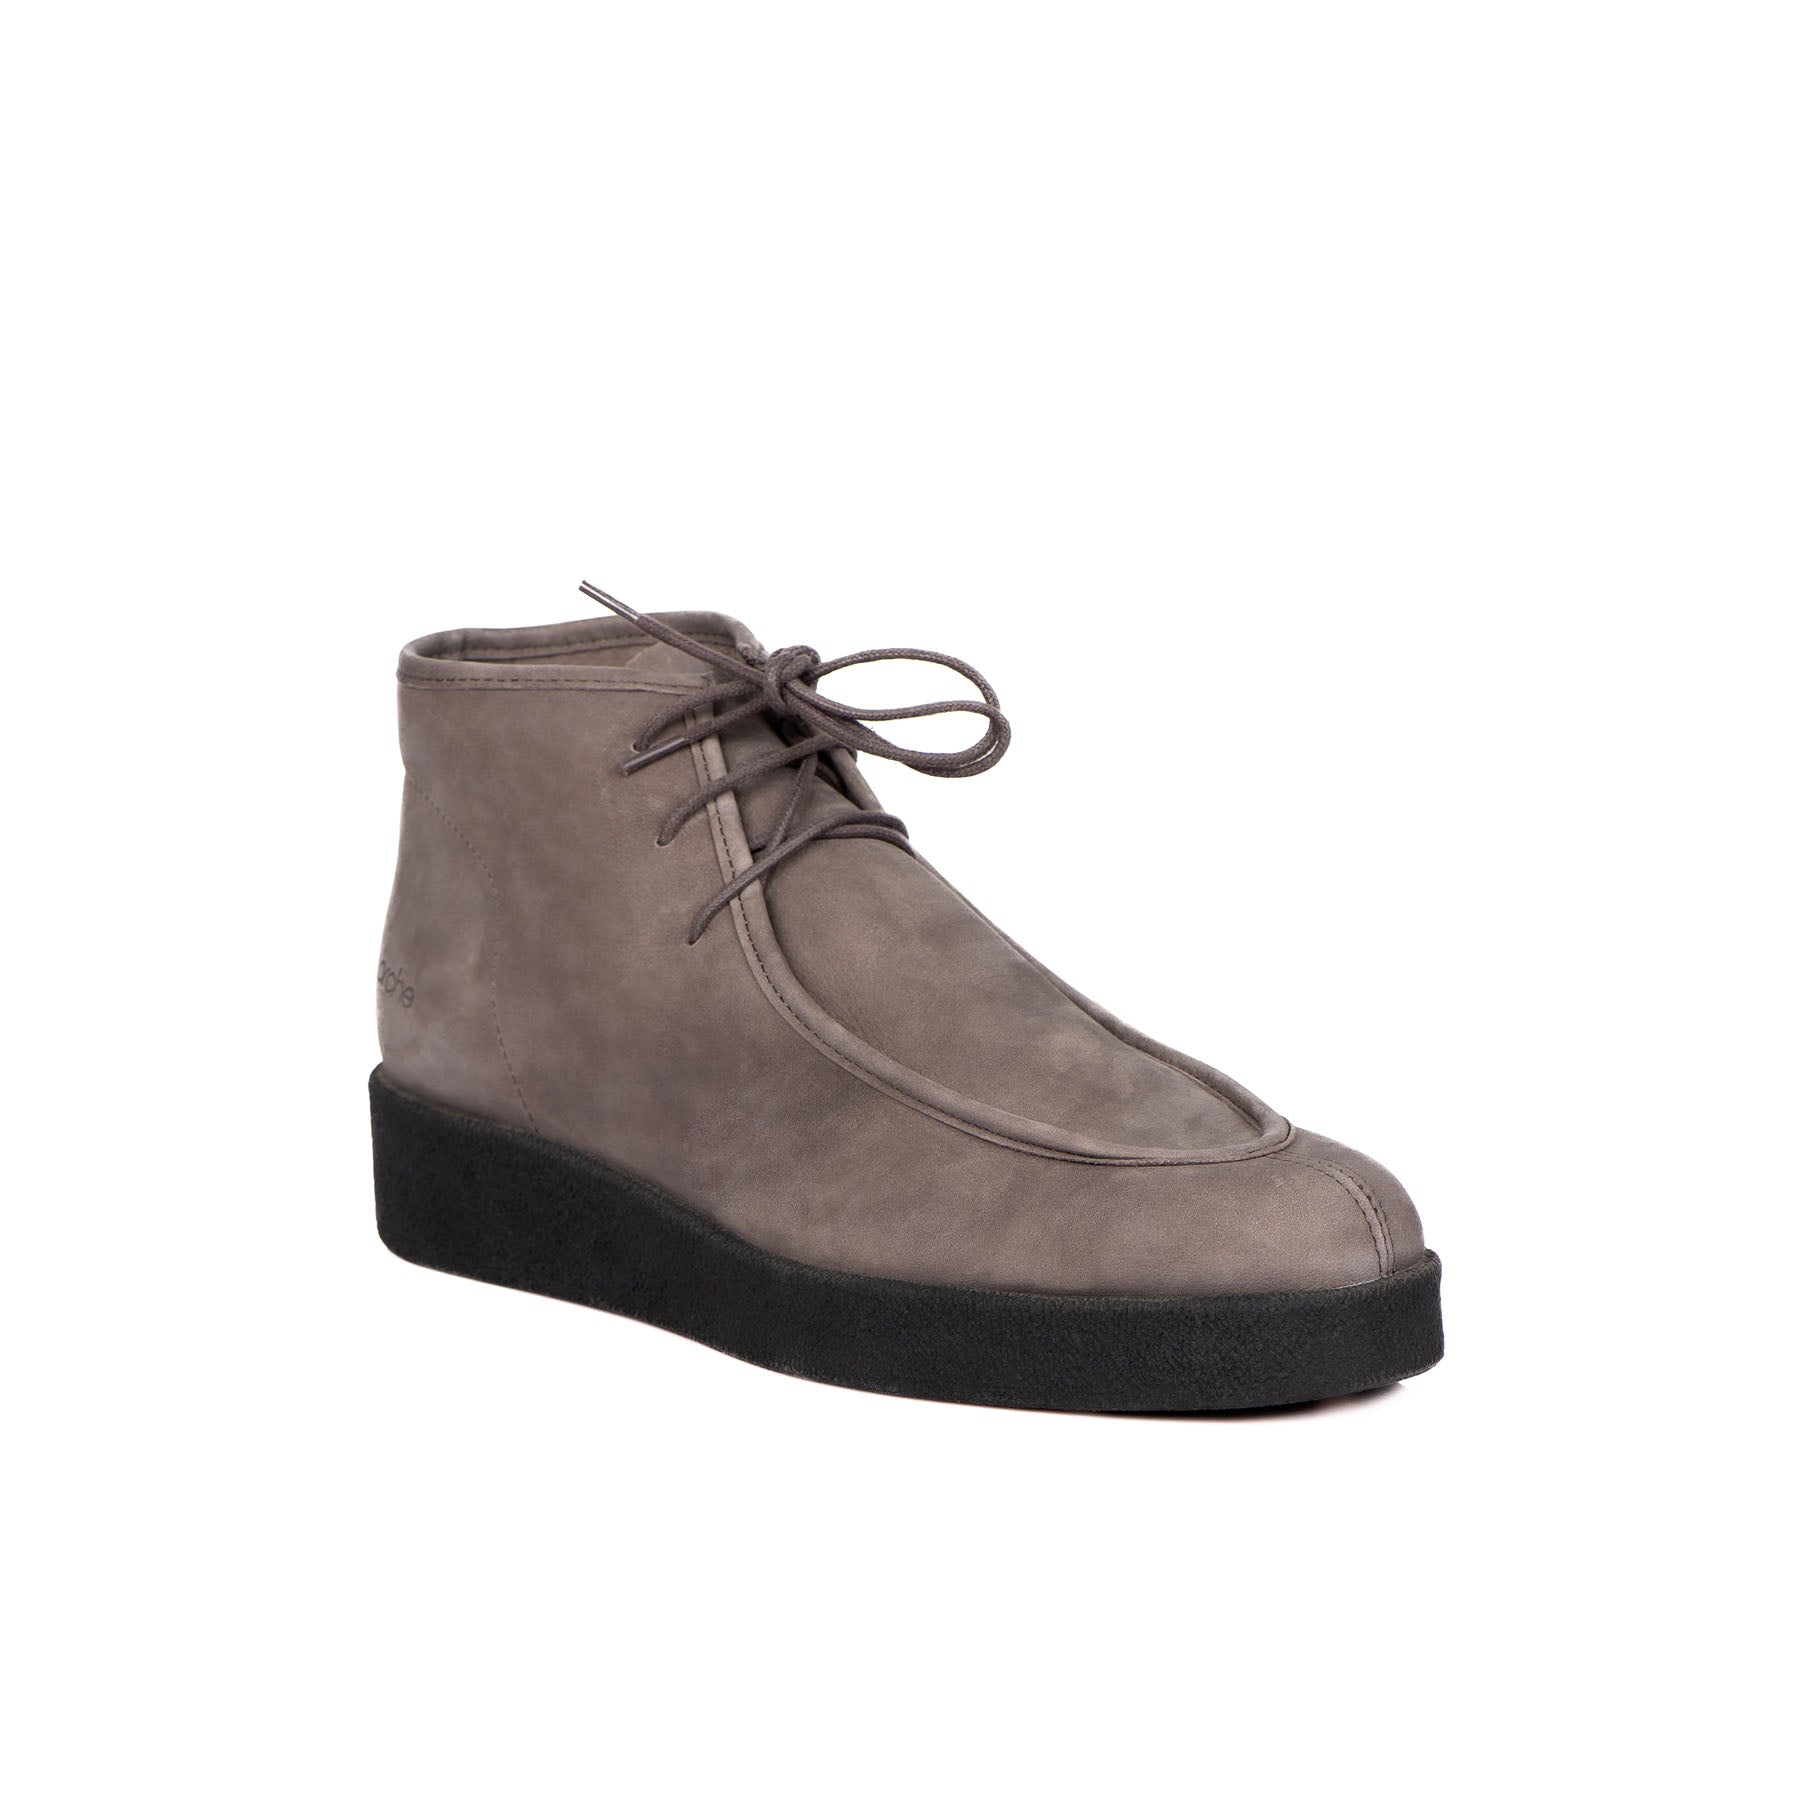 Chic & Simple Arche Boots Comell - Storm